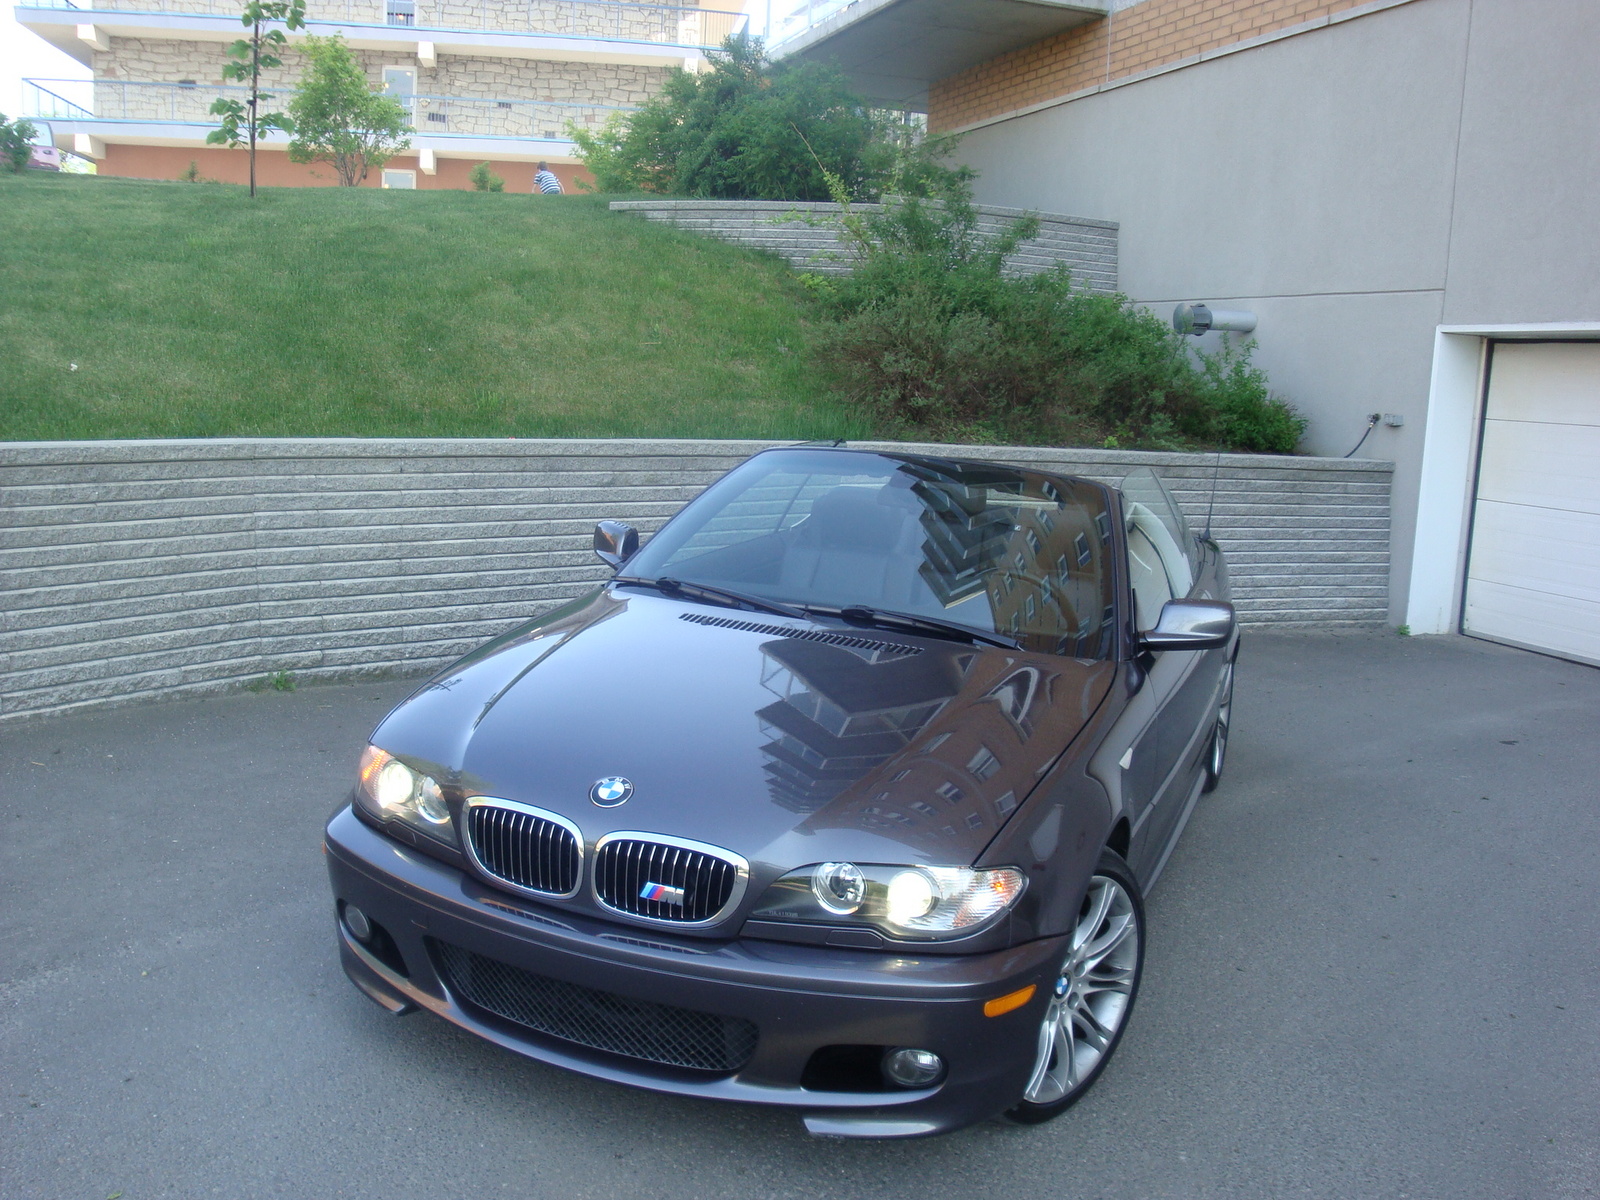 2006 Bmw 330i convertible review #6